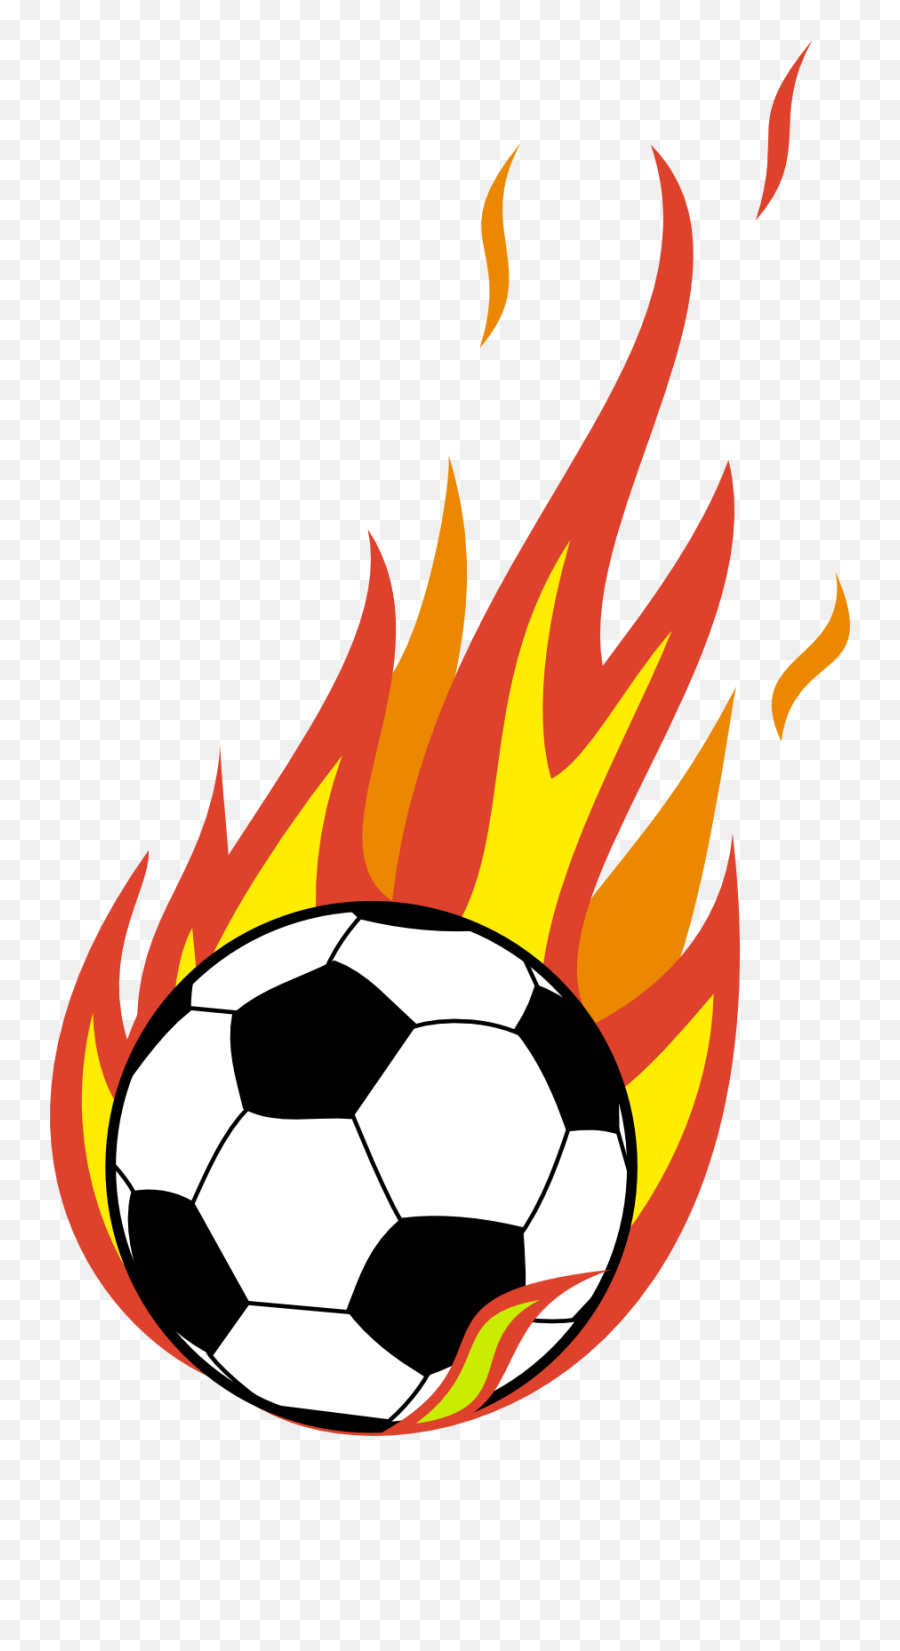 Flame Clipart Soccer Ball Flame Soccer - Flaming Soccer Ball Clip Art Emoji,Soccer Ball Girl Emoji